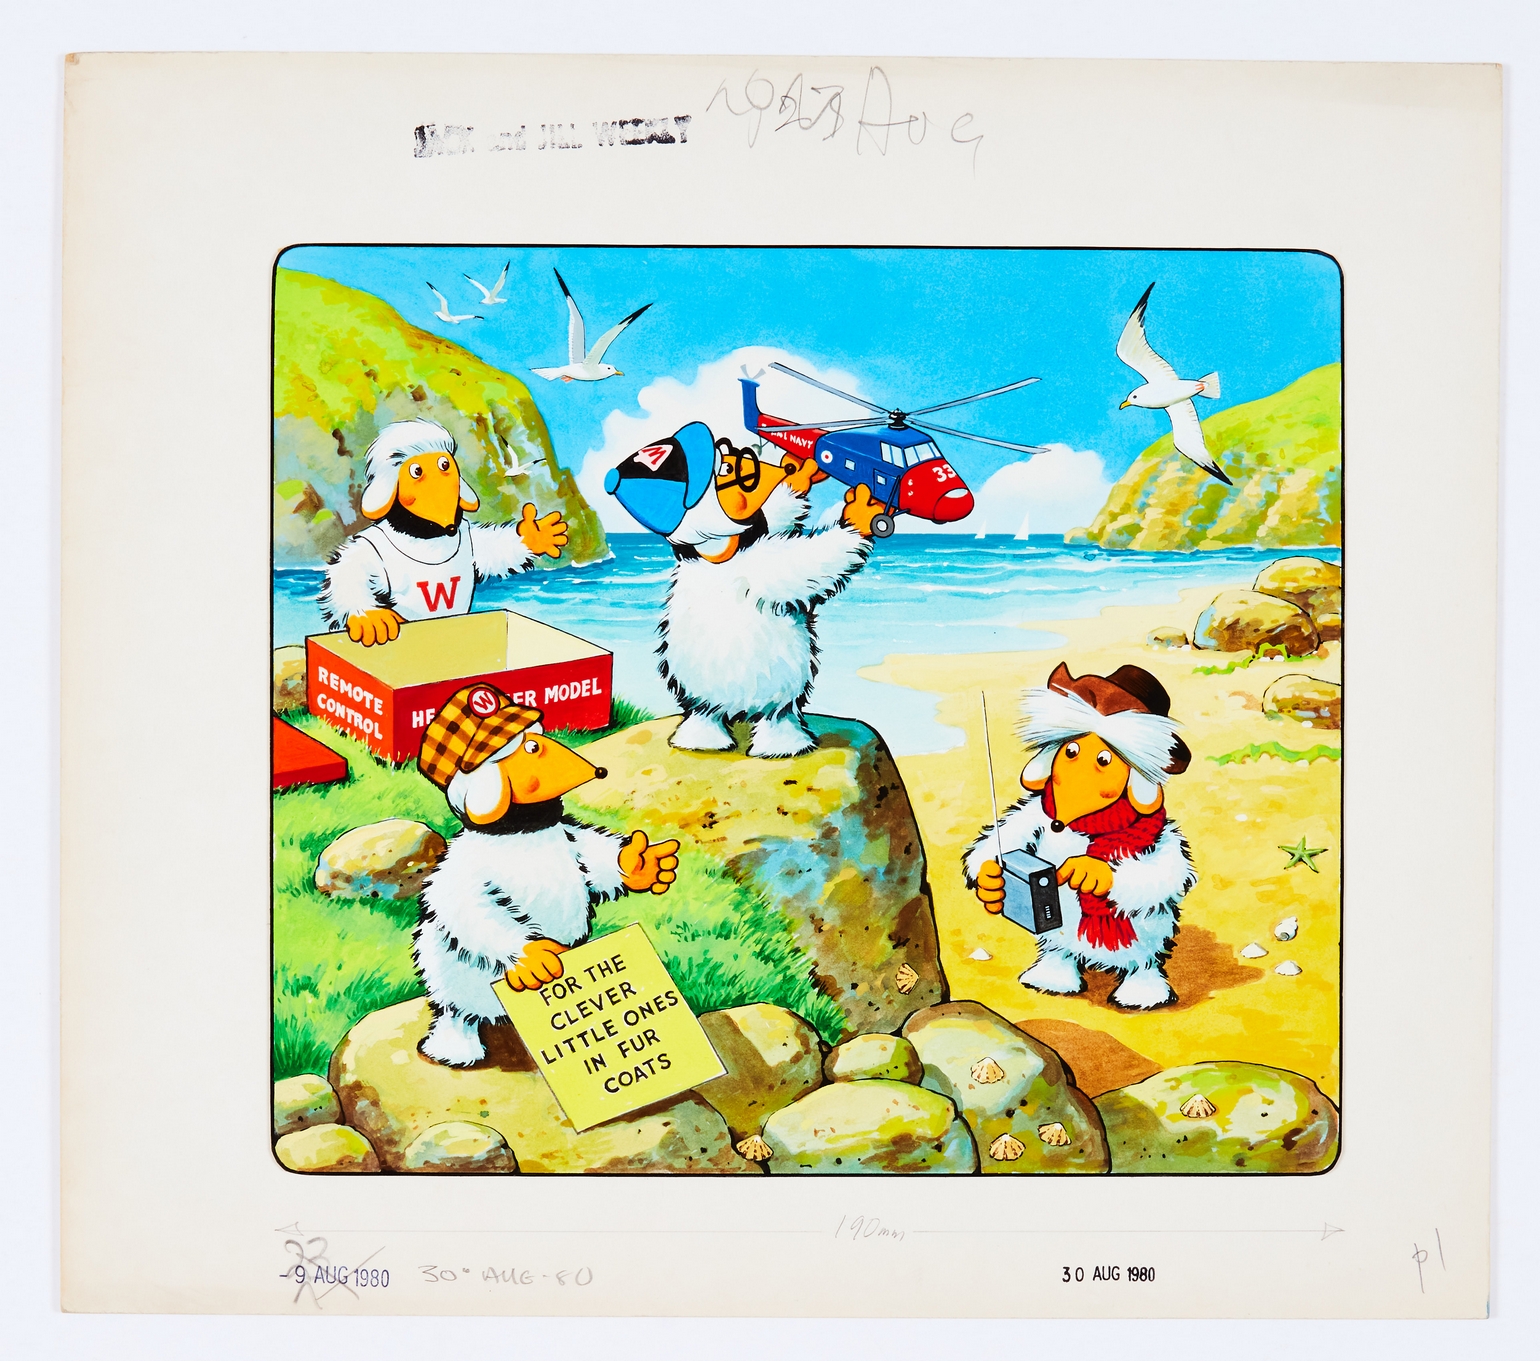 Wombles original front cover artwork by Jesus Biasco for Jack and Jill Weekly 30 Aug 1980. Gouache